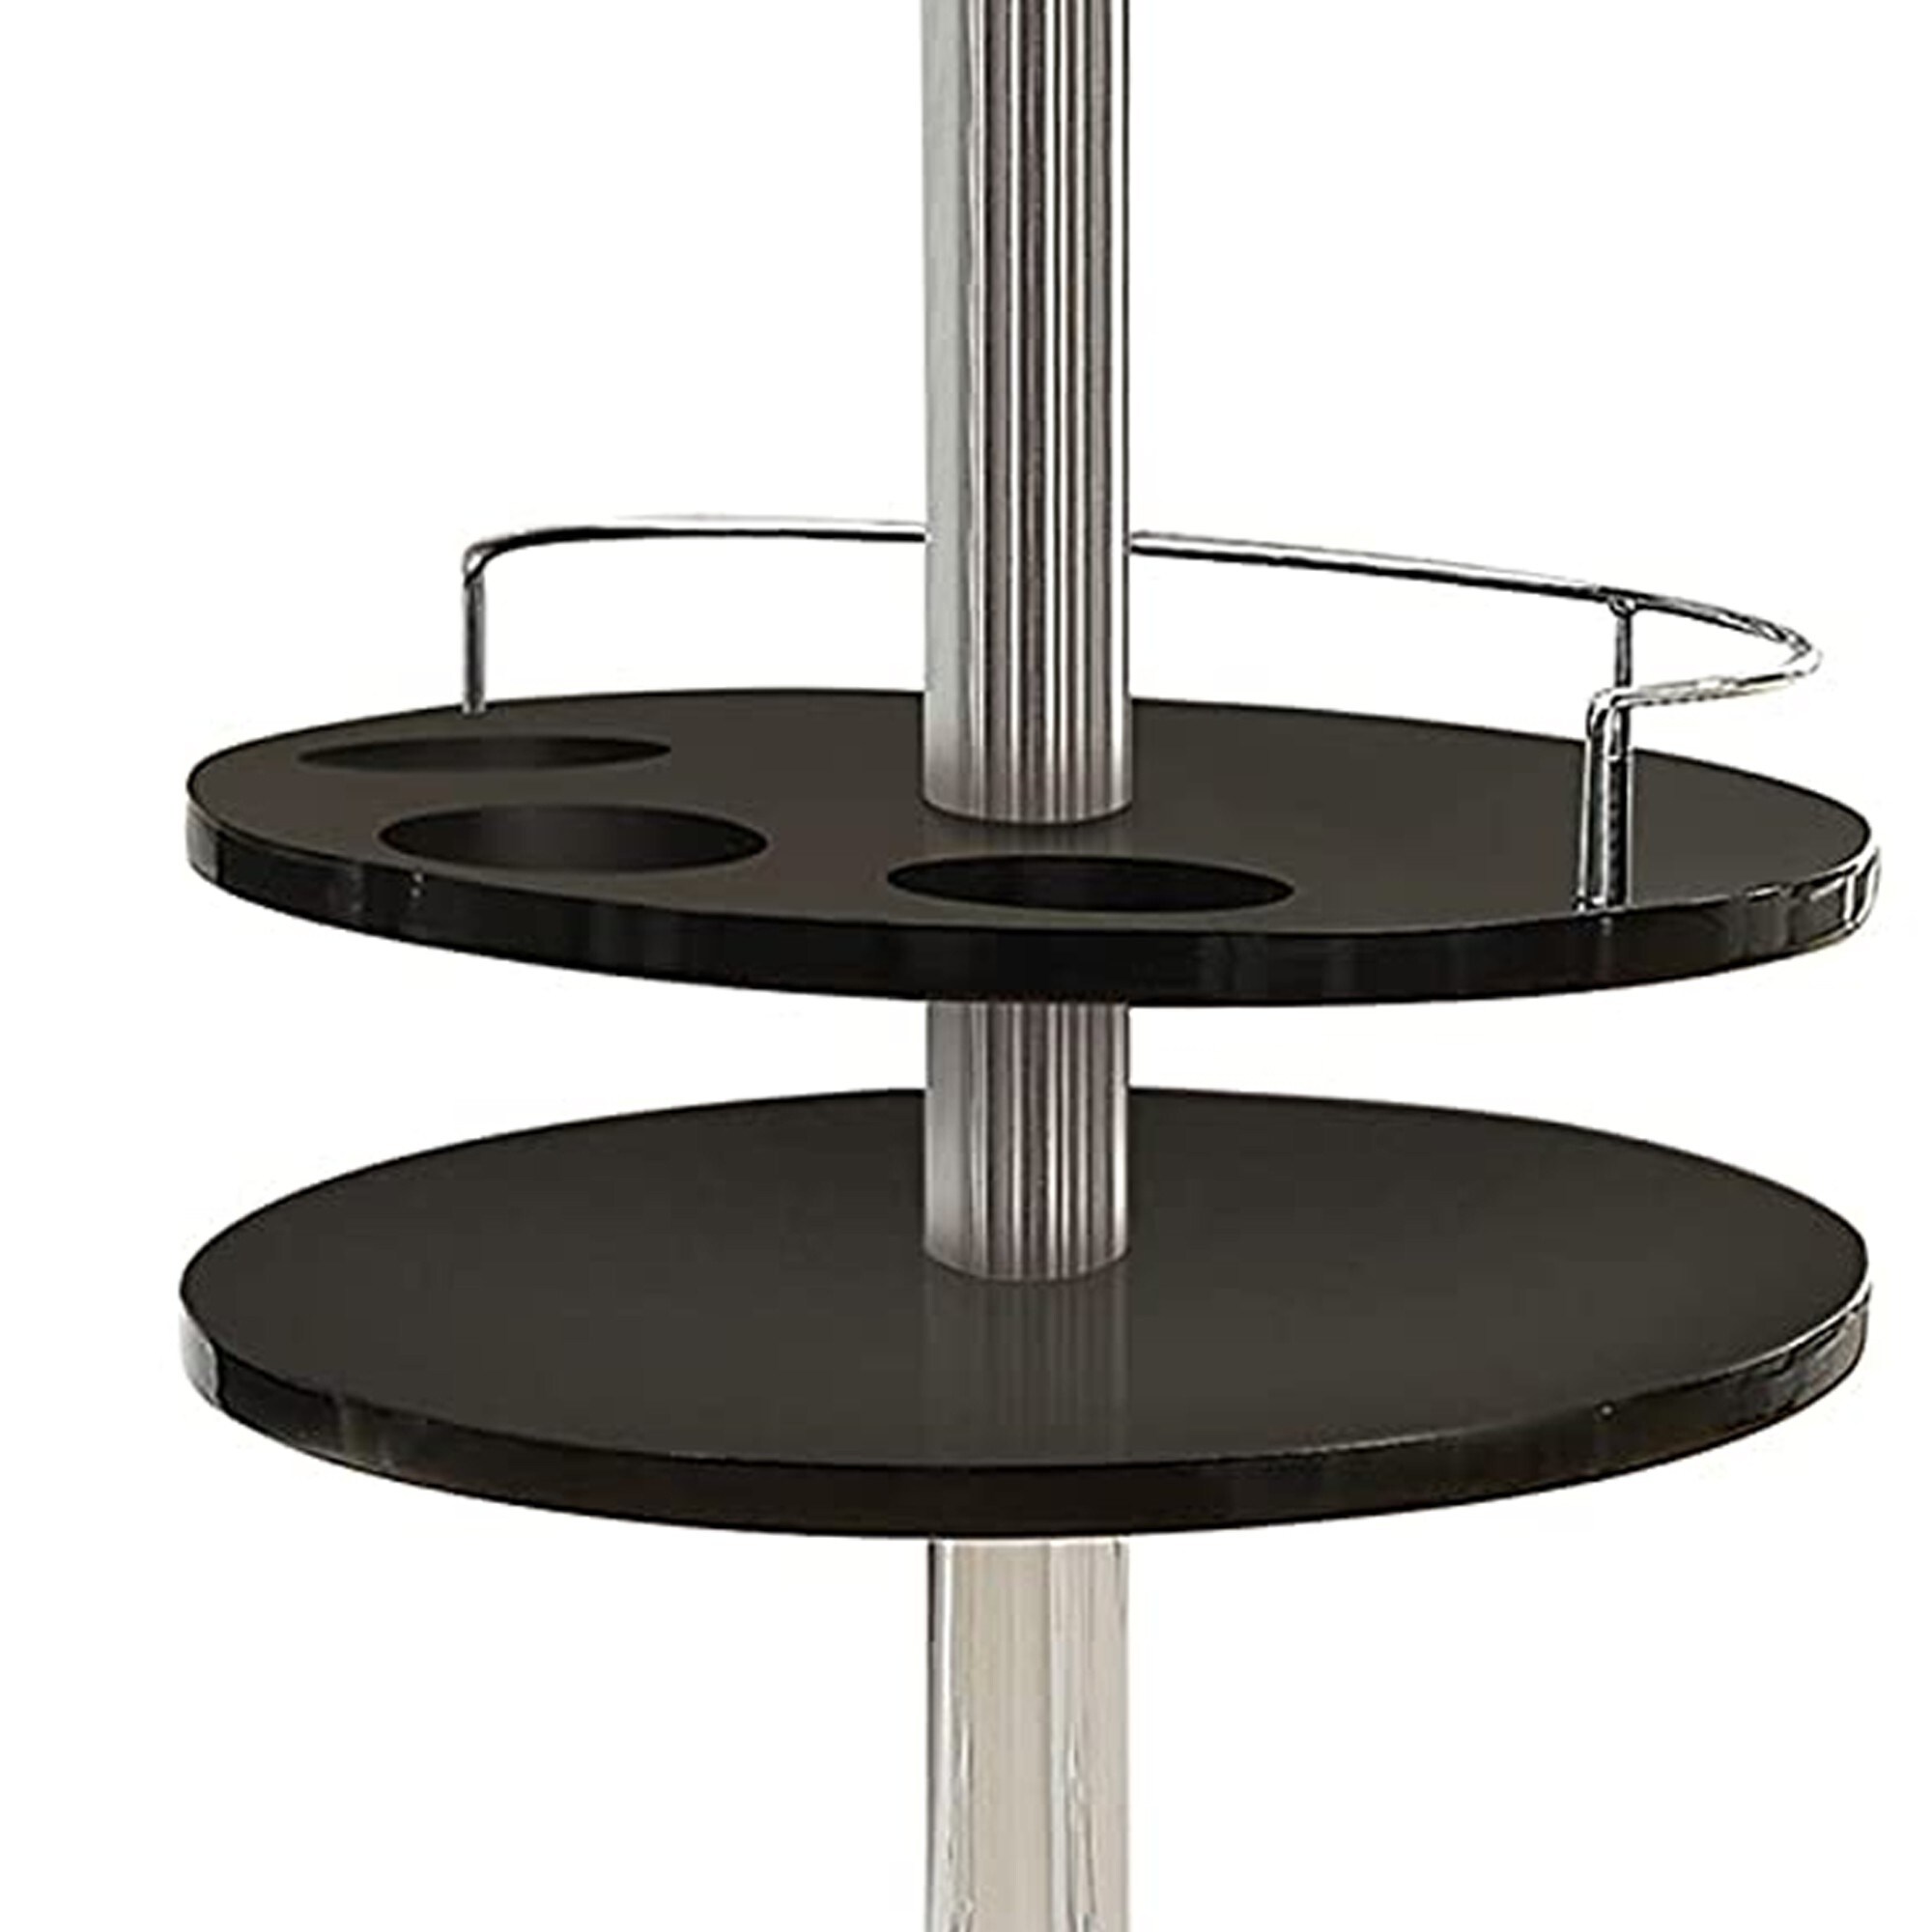 https://ak1.ostkcdn.com/images/products/is/images/direct/d78a4d356f36ac7d9d18b08bc1ca66d91e898f98/Round-Bar-Table-with-Tempered-Glass-Top-and-Storage%2C-Black-and-Chrome.jpg